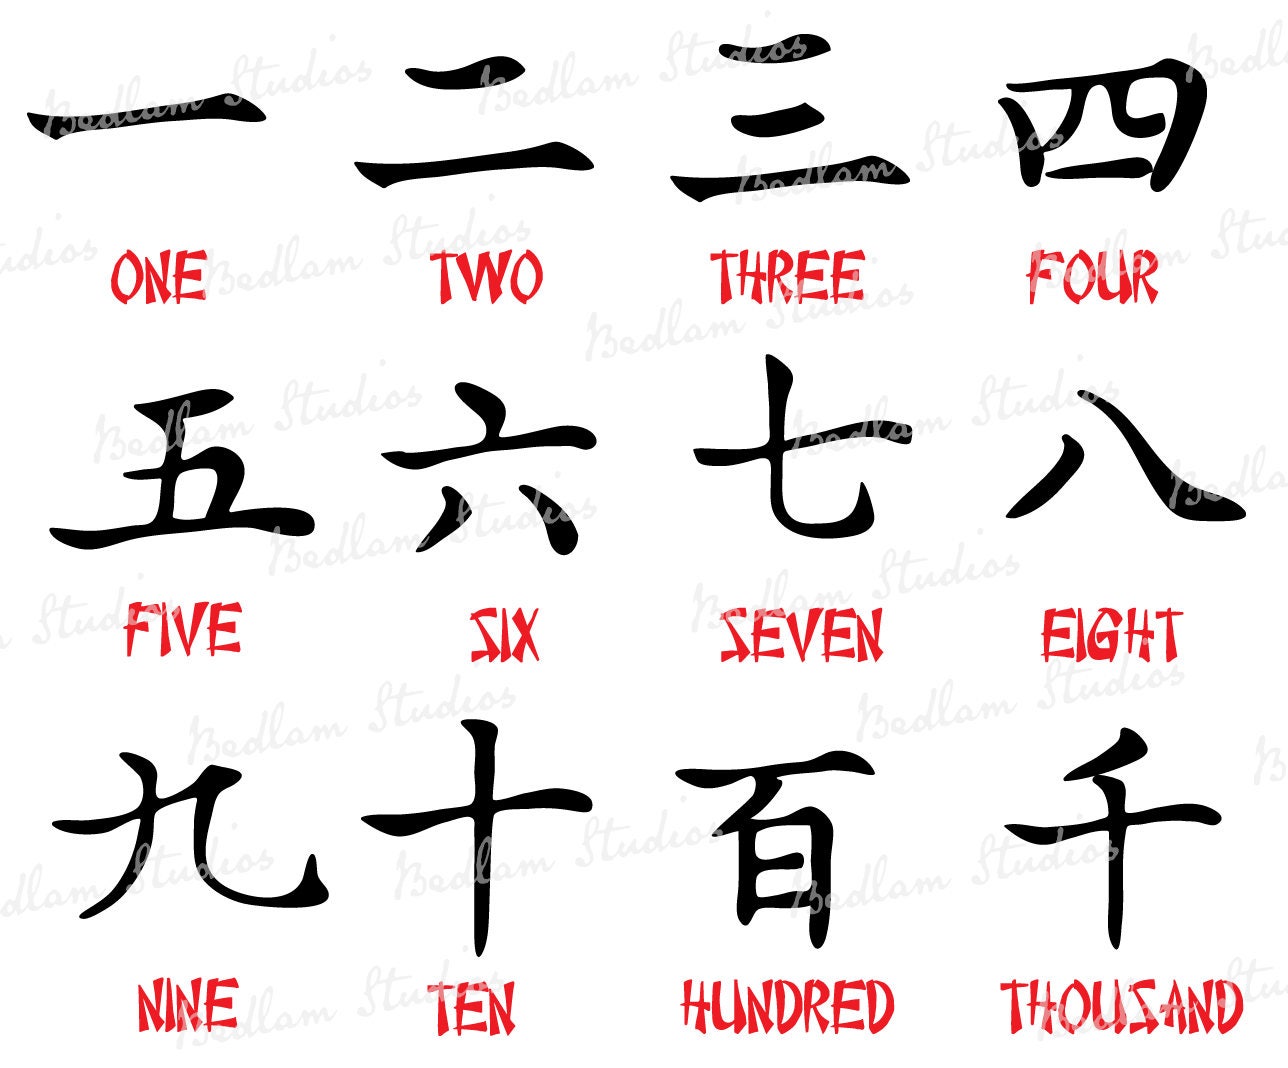 Chinese Numbers - Your Go-to Guide for Counting in Chinese from 0 - 100+